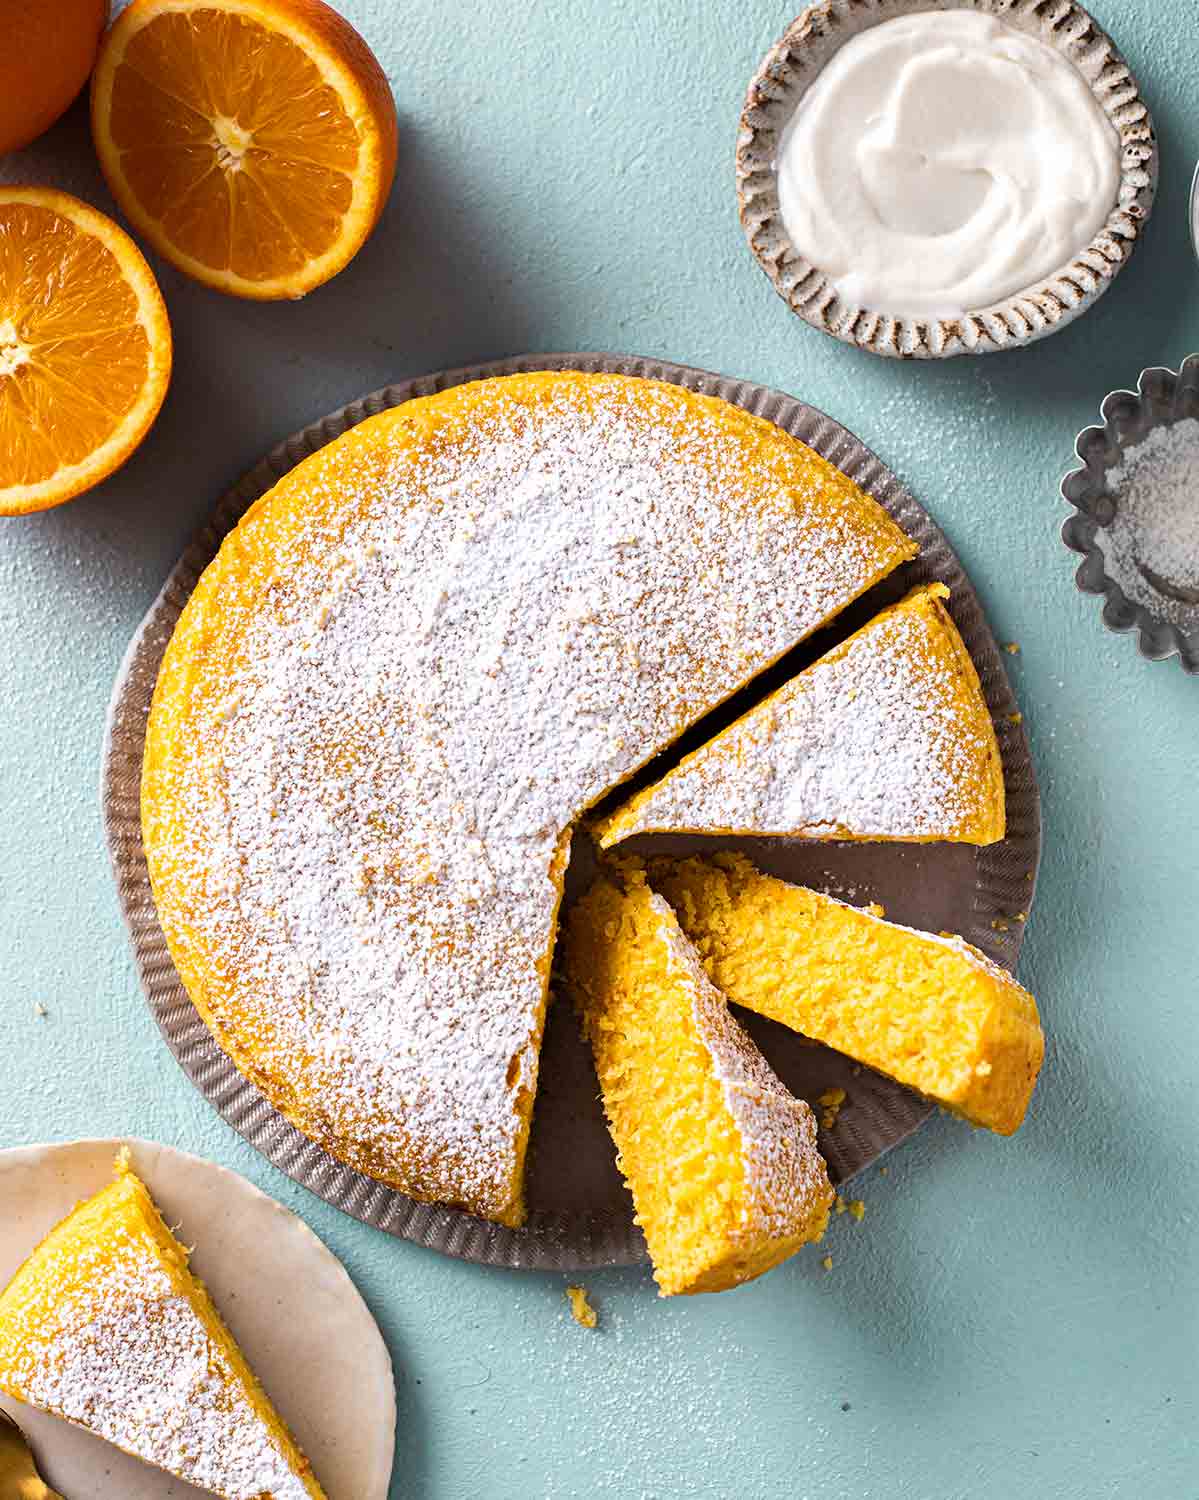 Simple vegan orange cake dusted with icing sugar on plate with a few slices coming out showing beautiful orange hue